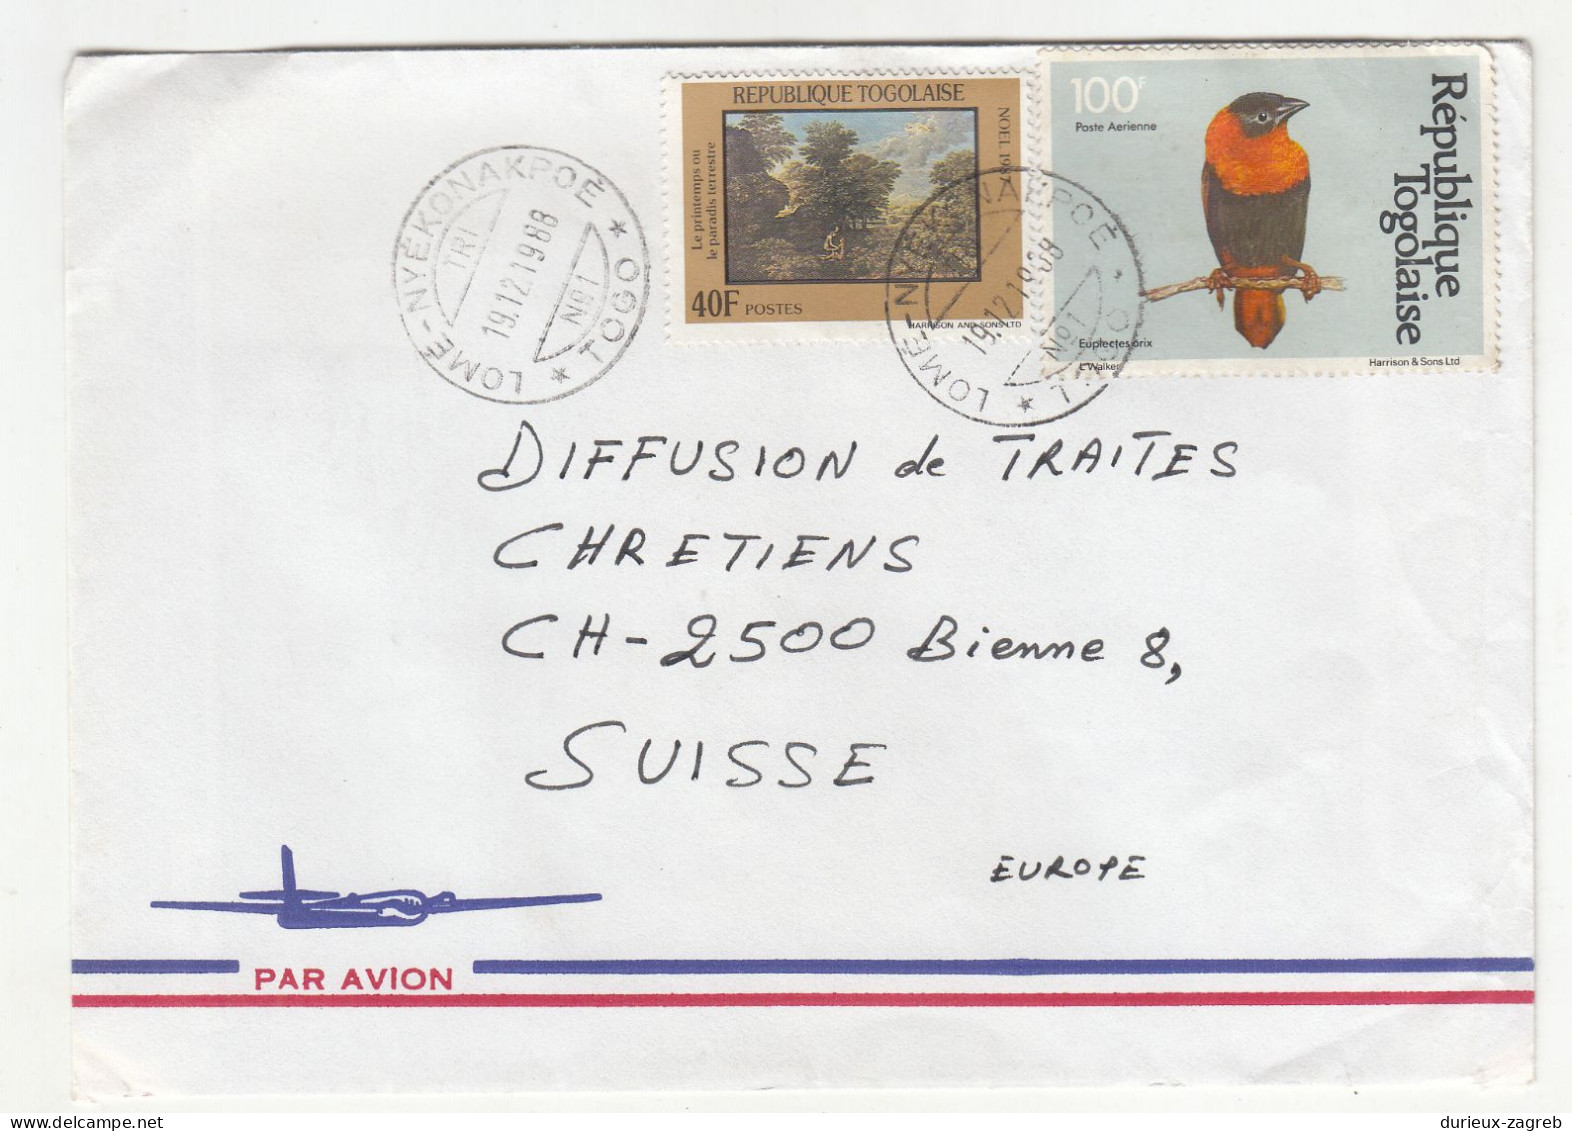 Republique Togolaise 32 letter covers posted 1988 to Switzerland b240510